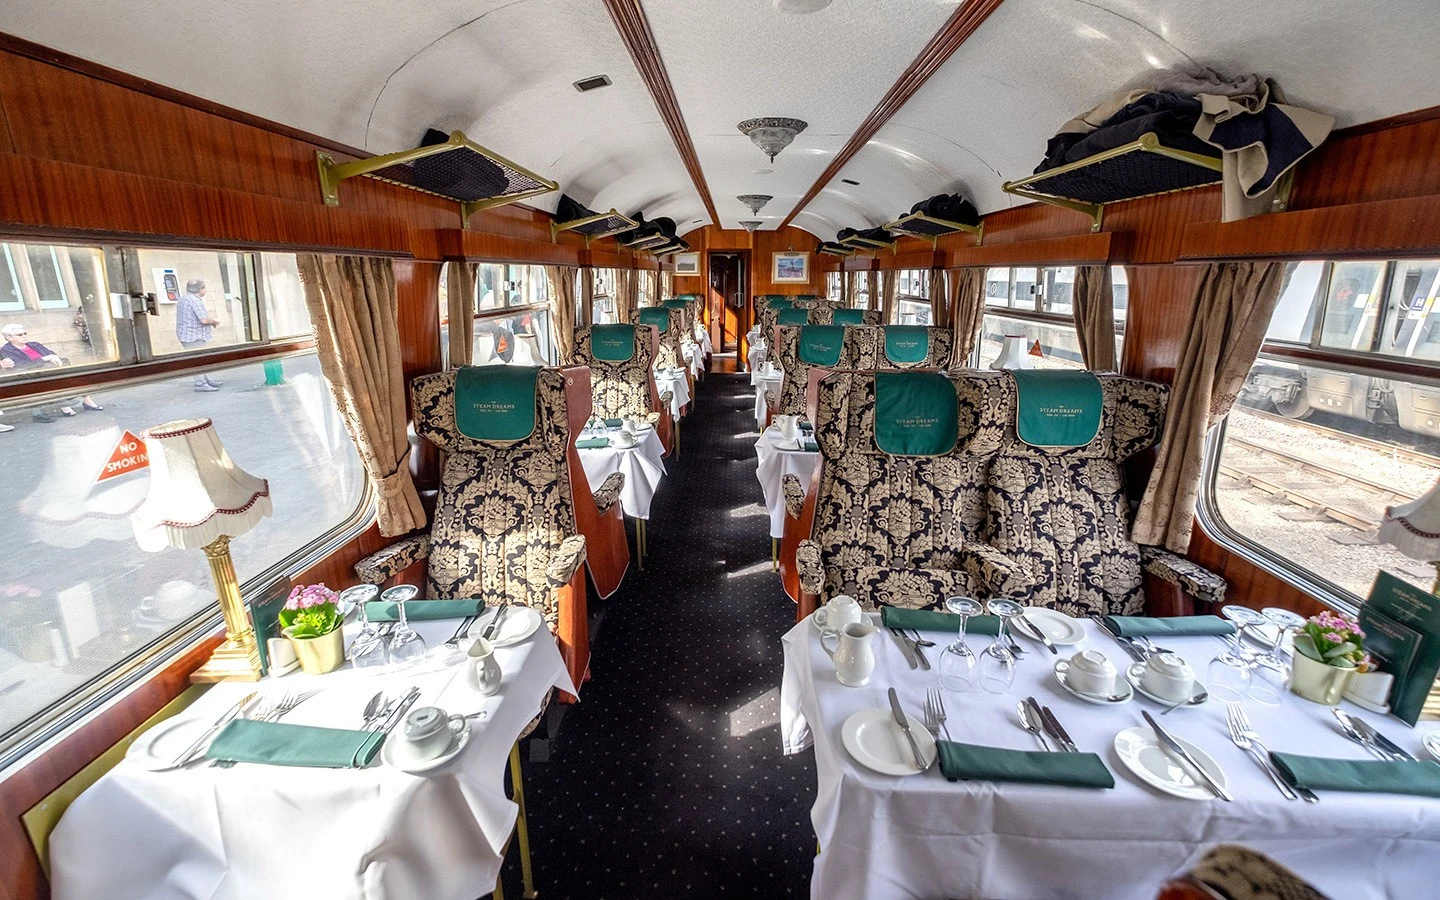 The Pullman Dining carriage